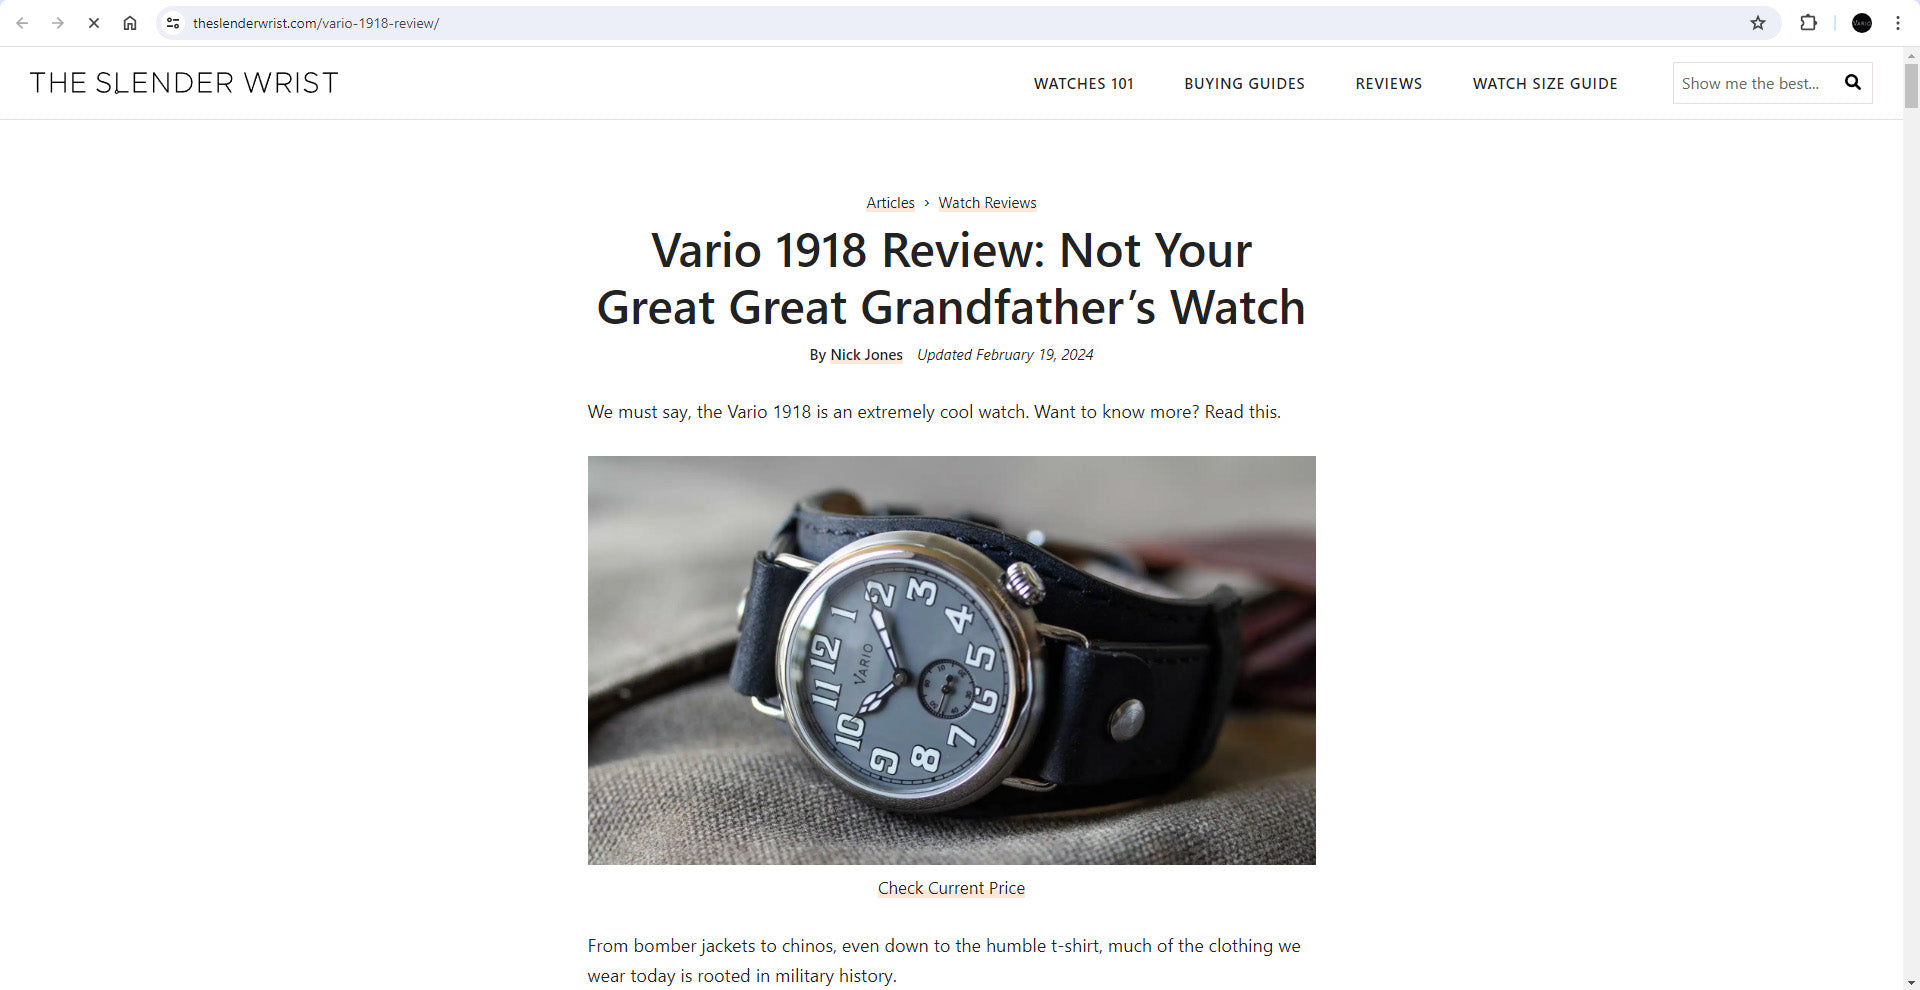 Vario 1918 Trench featured on The Slender Wrist